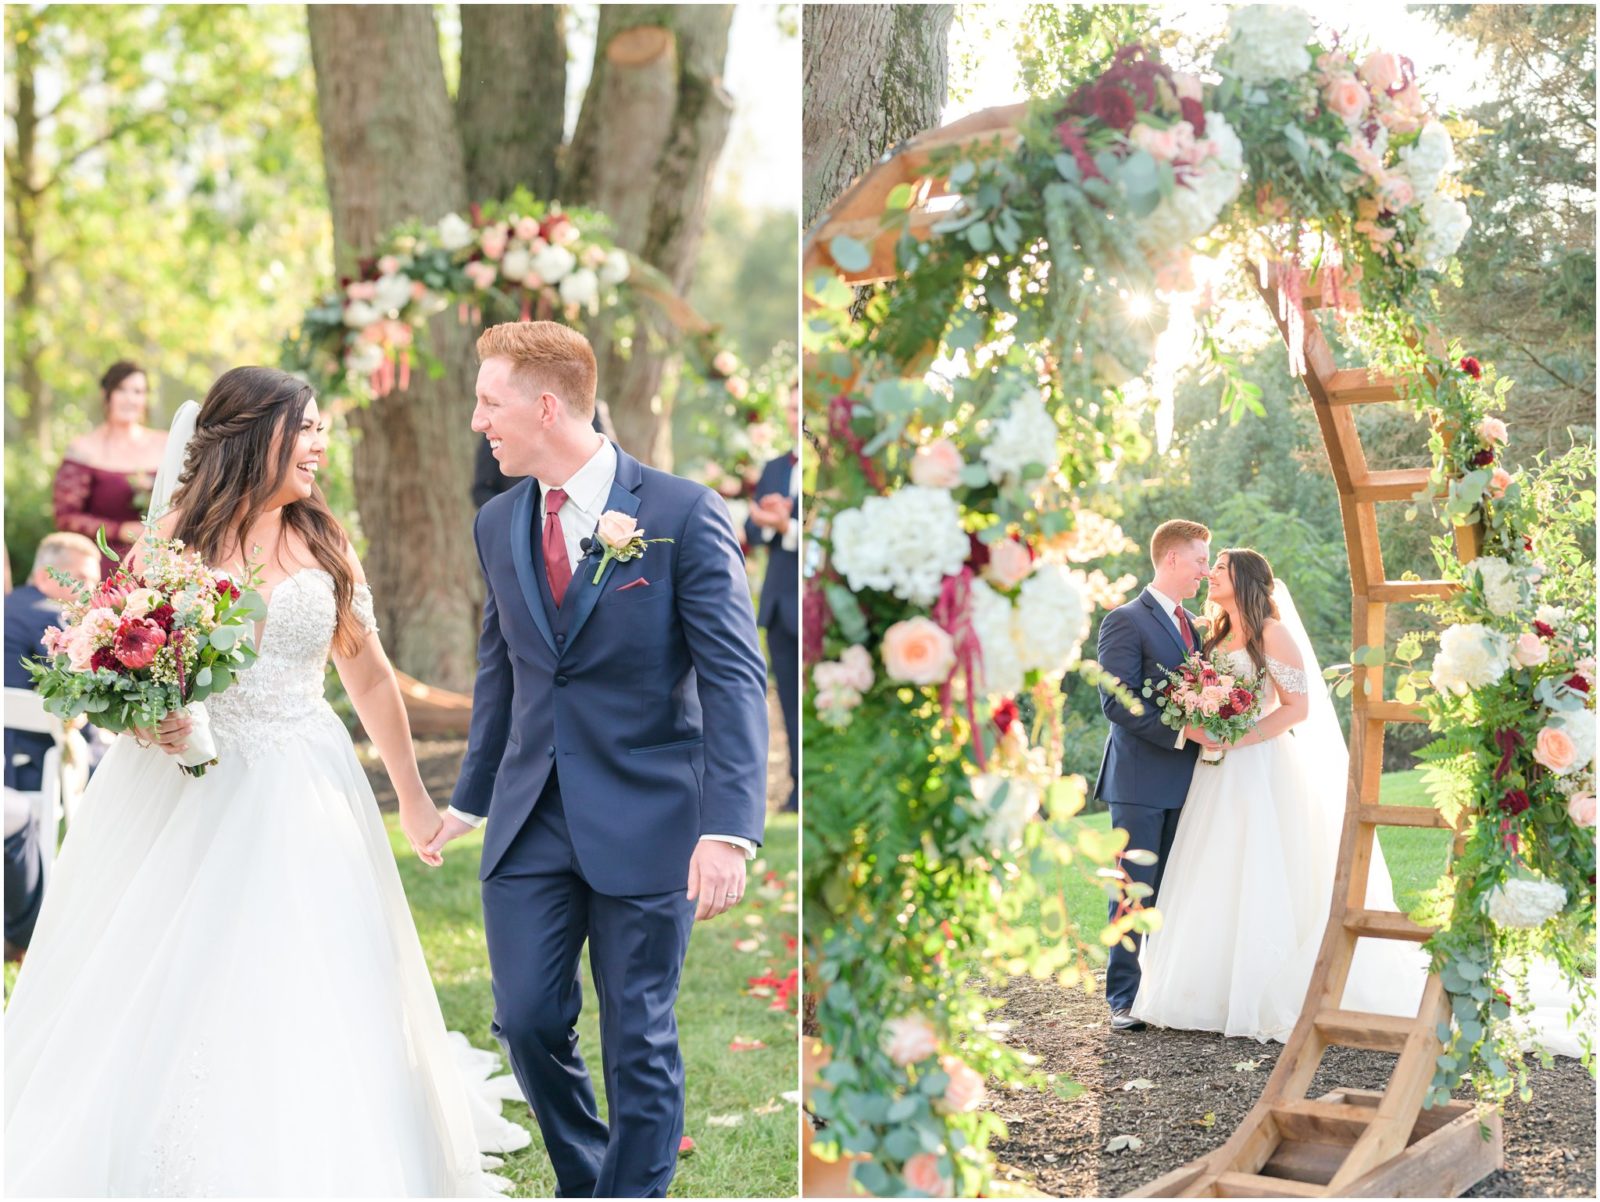 Bride and groom nose to nose Mustard Seed Gardens wedding